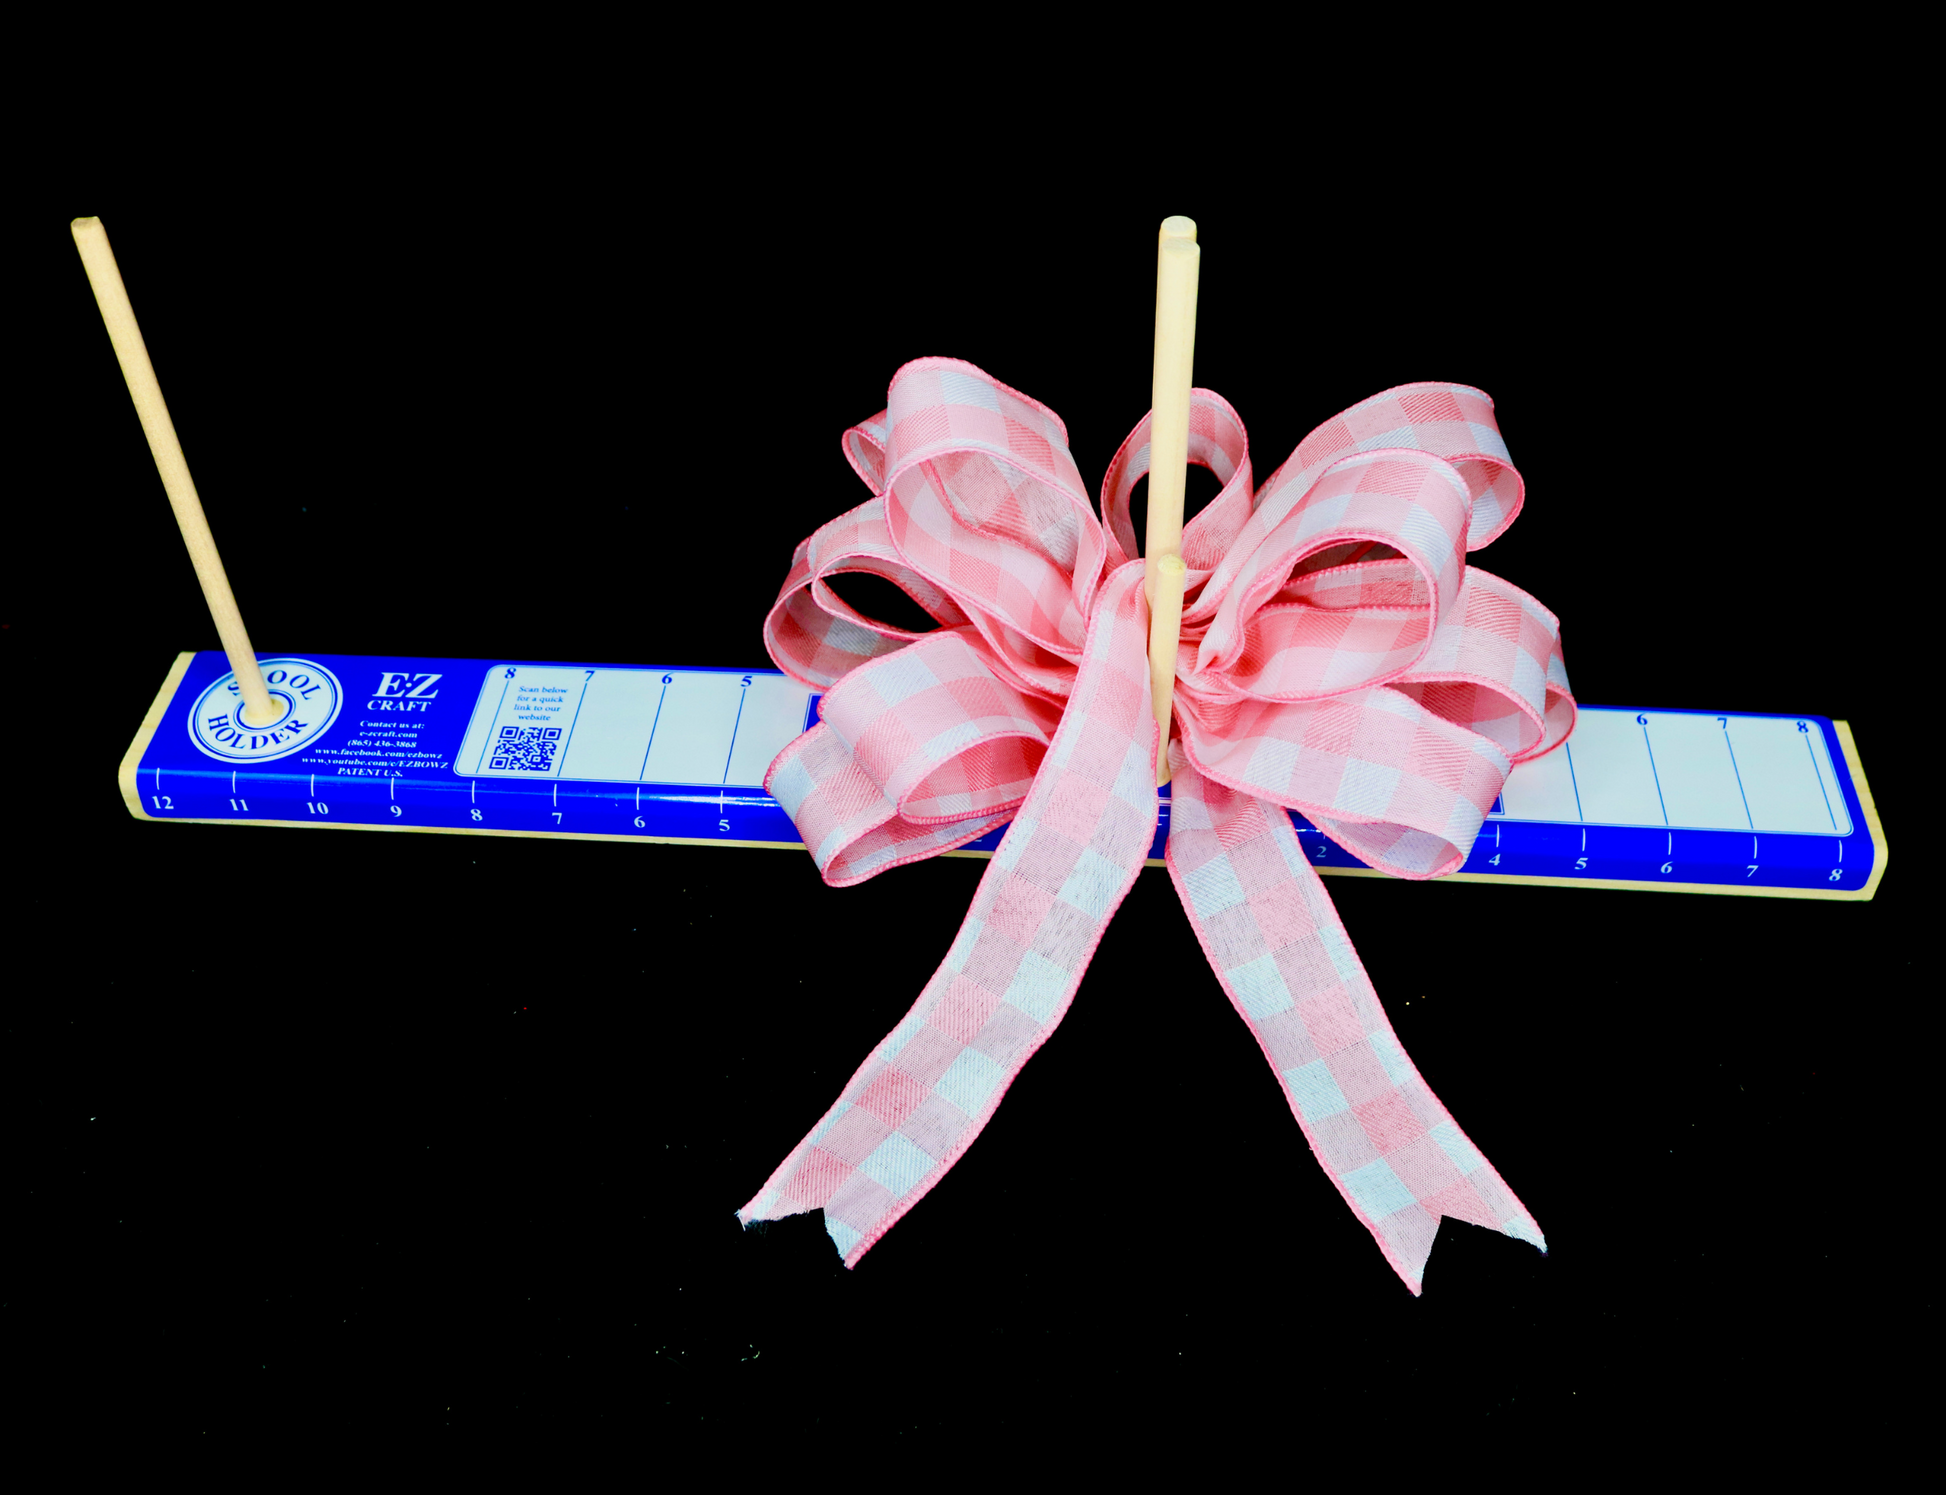 Deluxe E-Z Bowz & Rose Maker (Ribbon Bow Makers) - arts & crafts